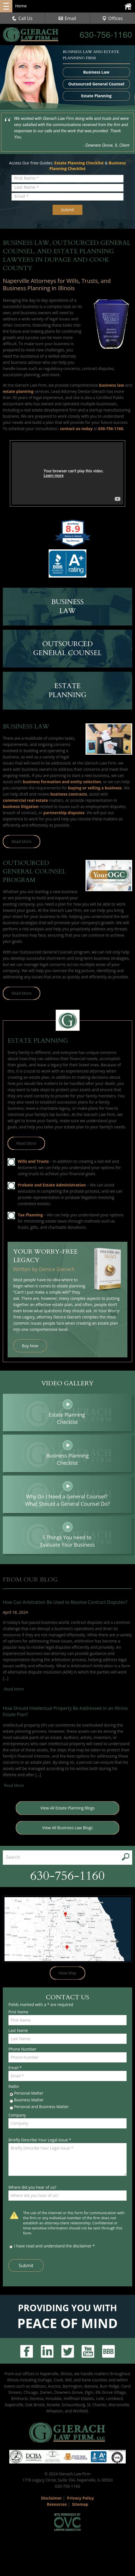 The Gierach Law Firm - Naperville IL Lawyers